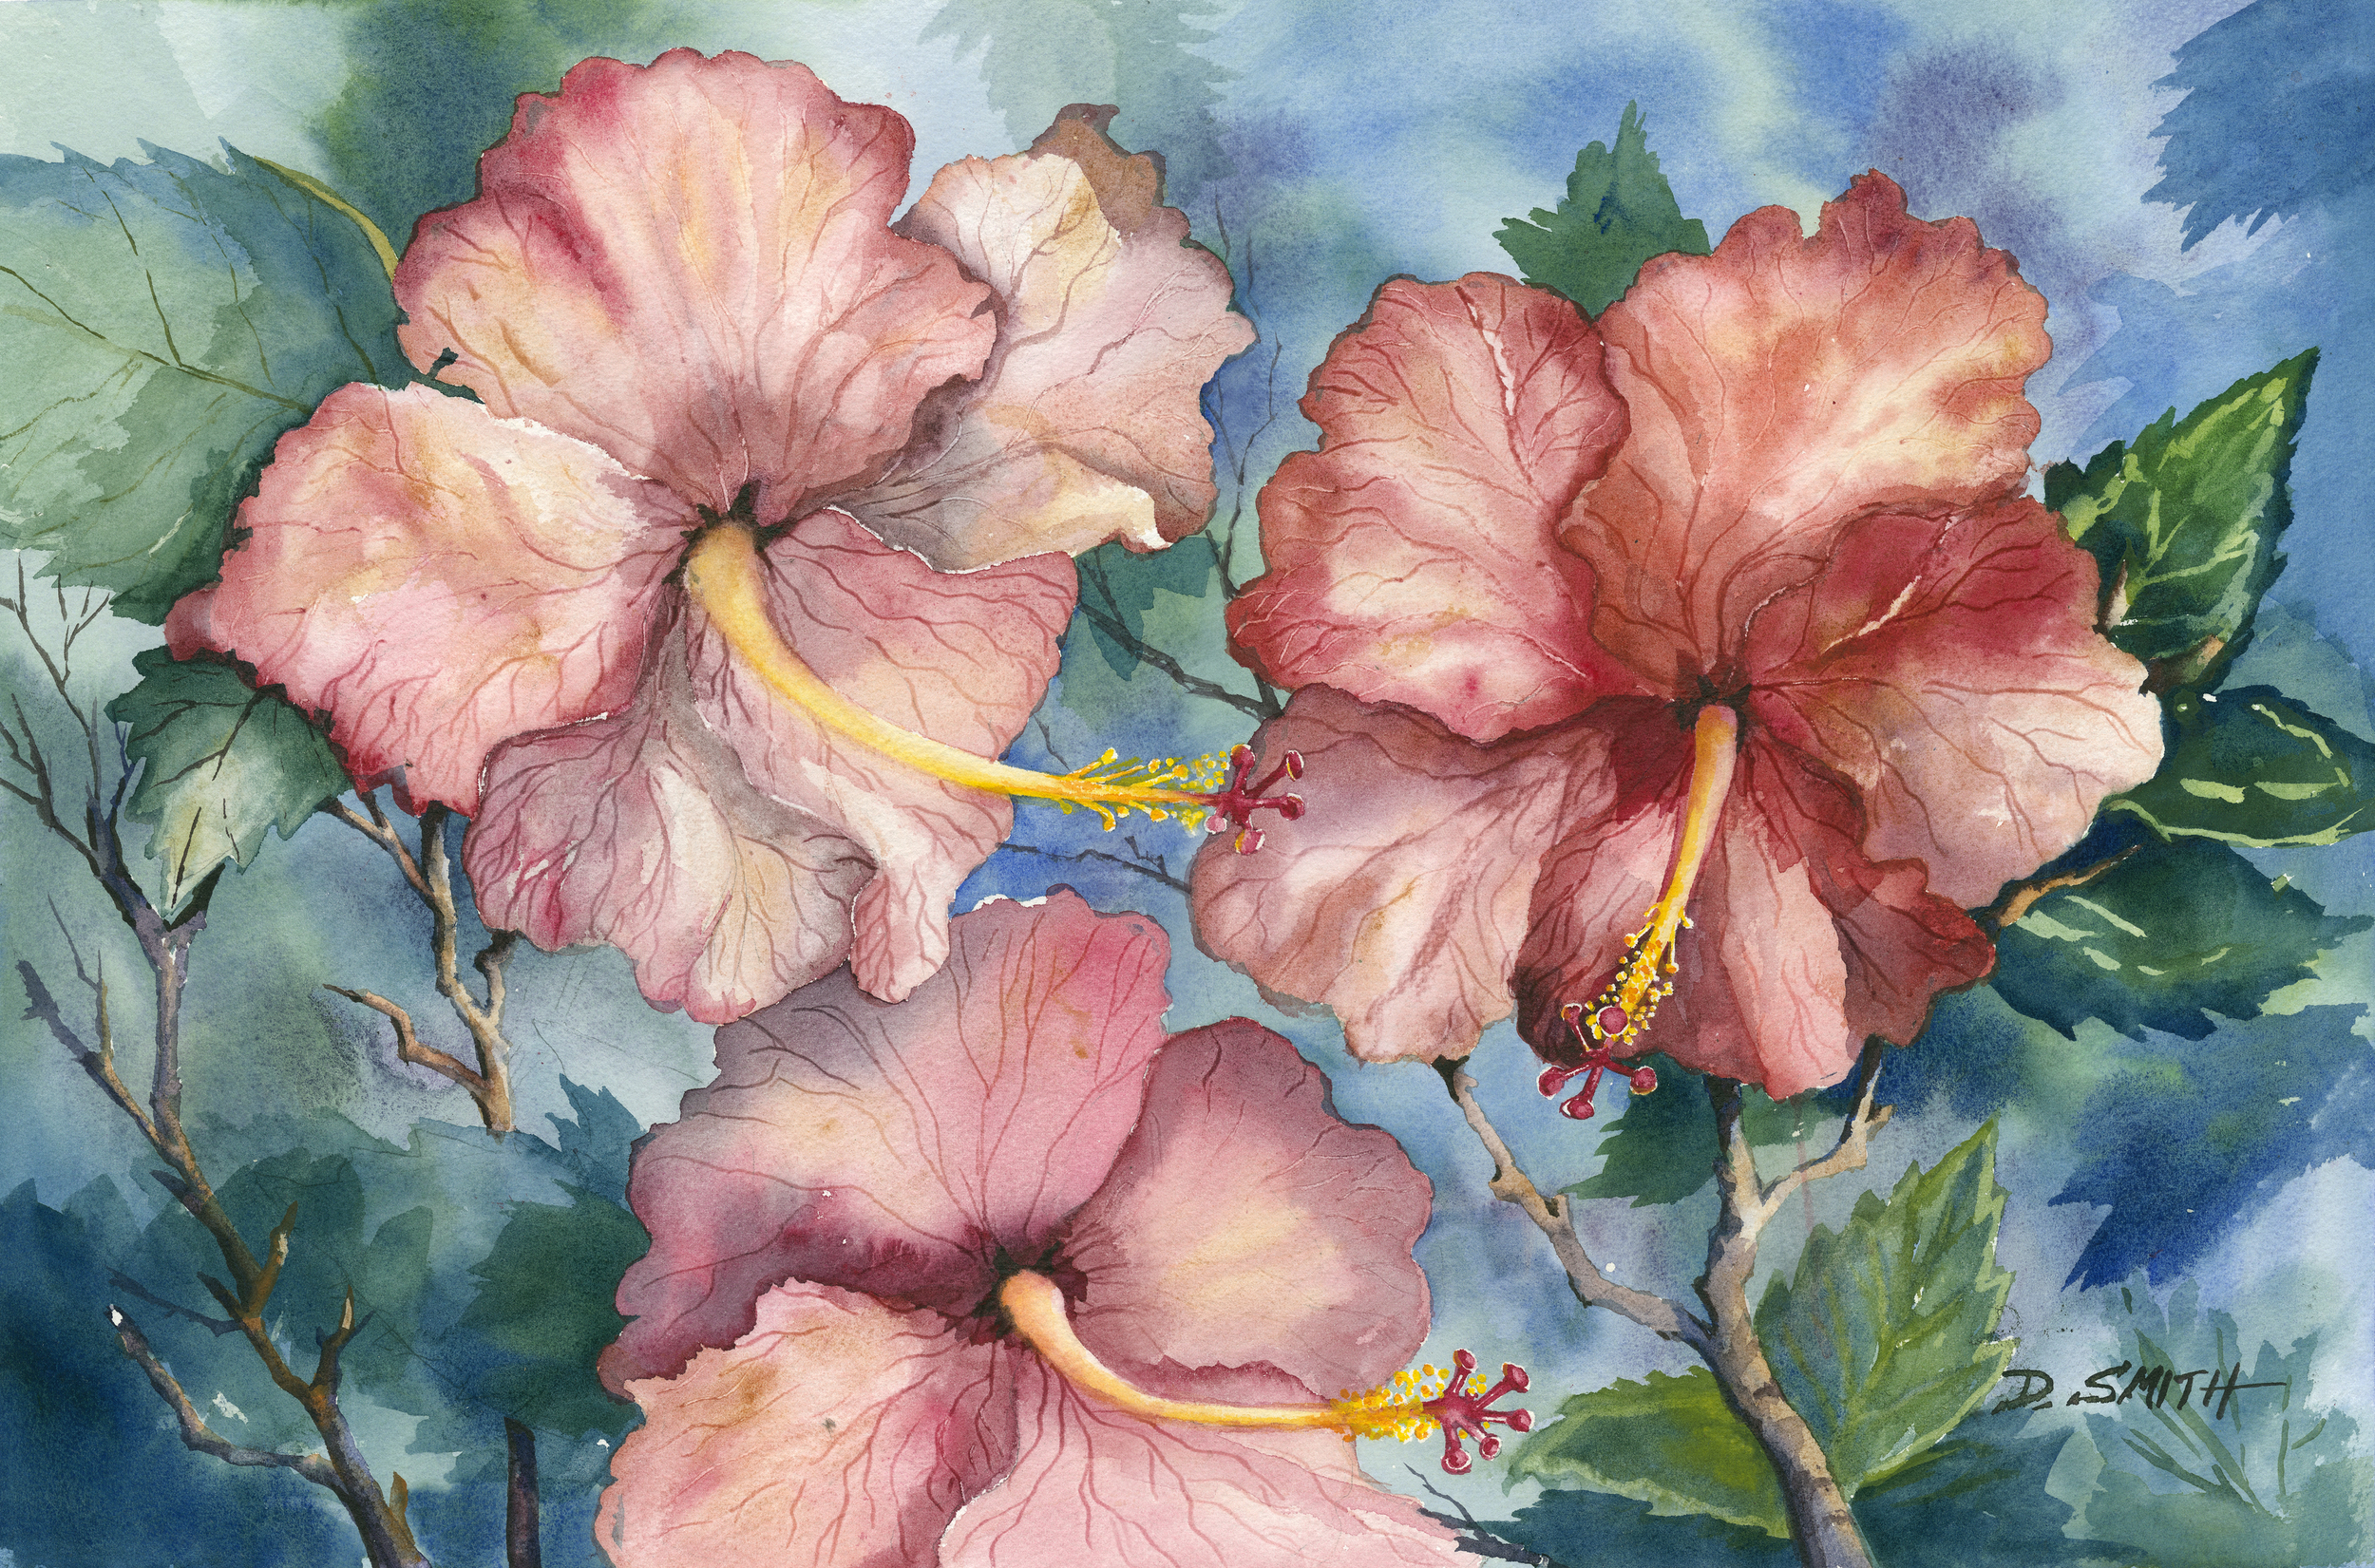 "Hibiscus #2" - Sold - Prints Available